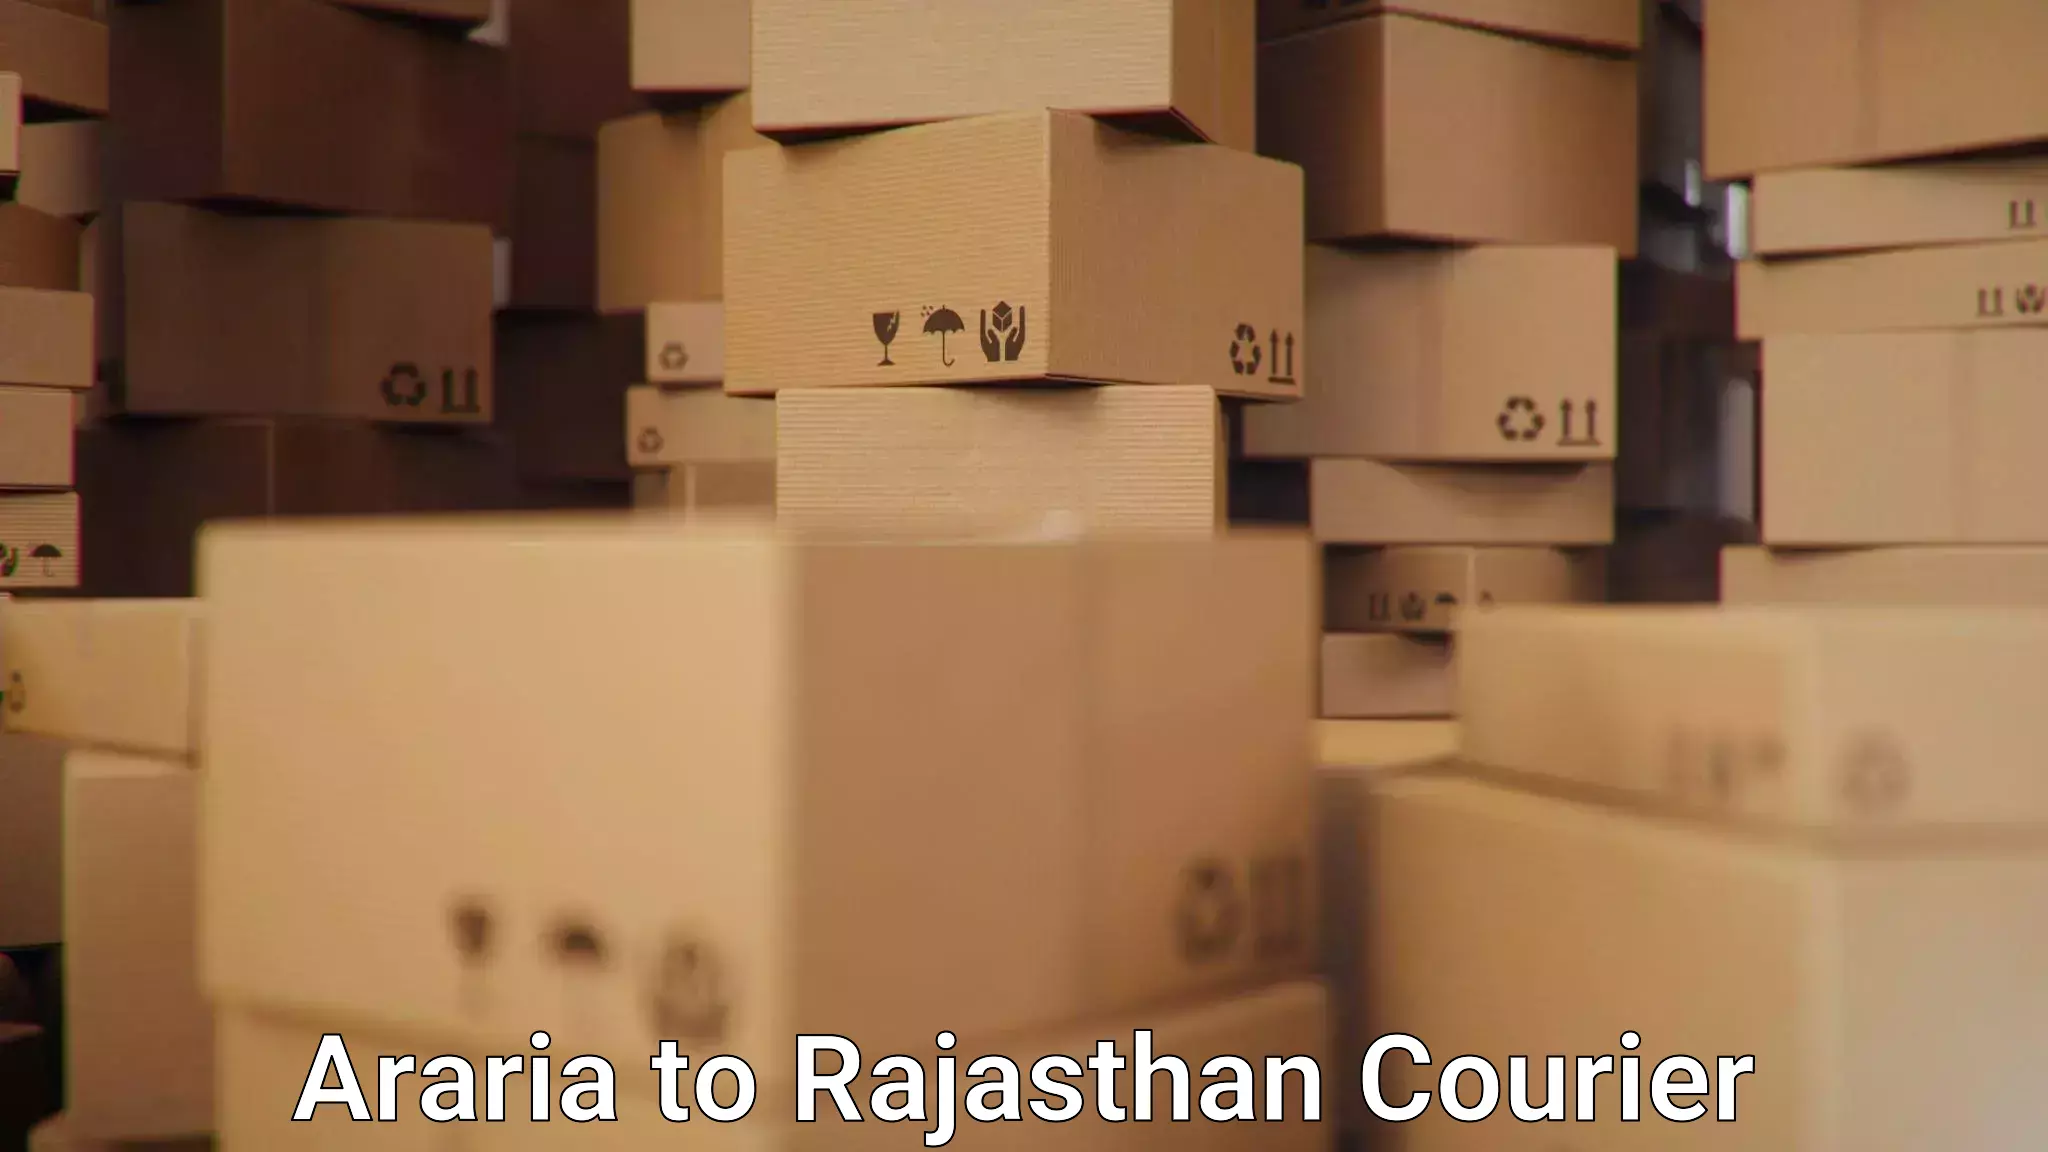 Bulk courier orders in Araria to Jalore